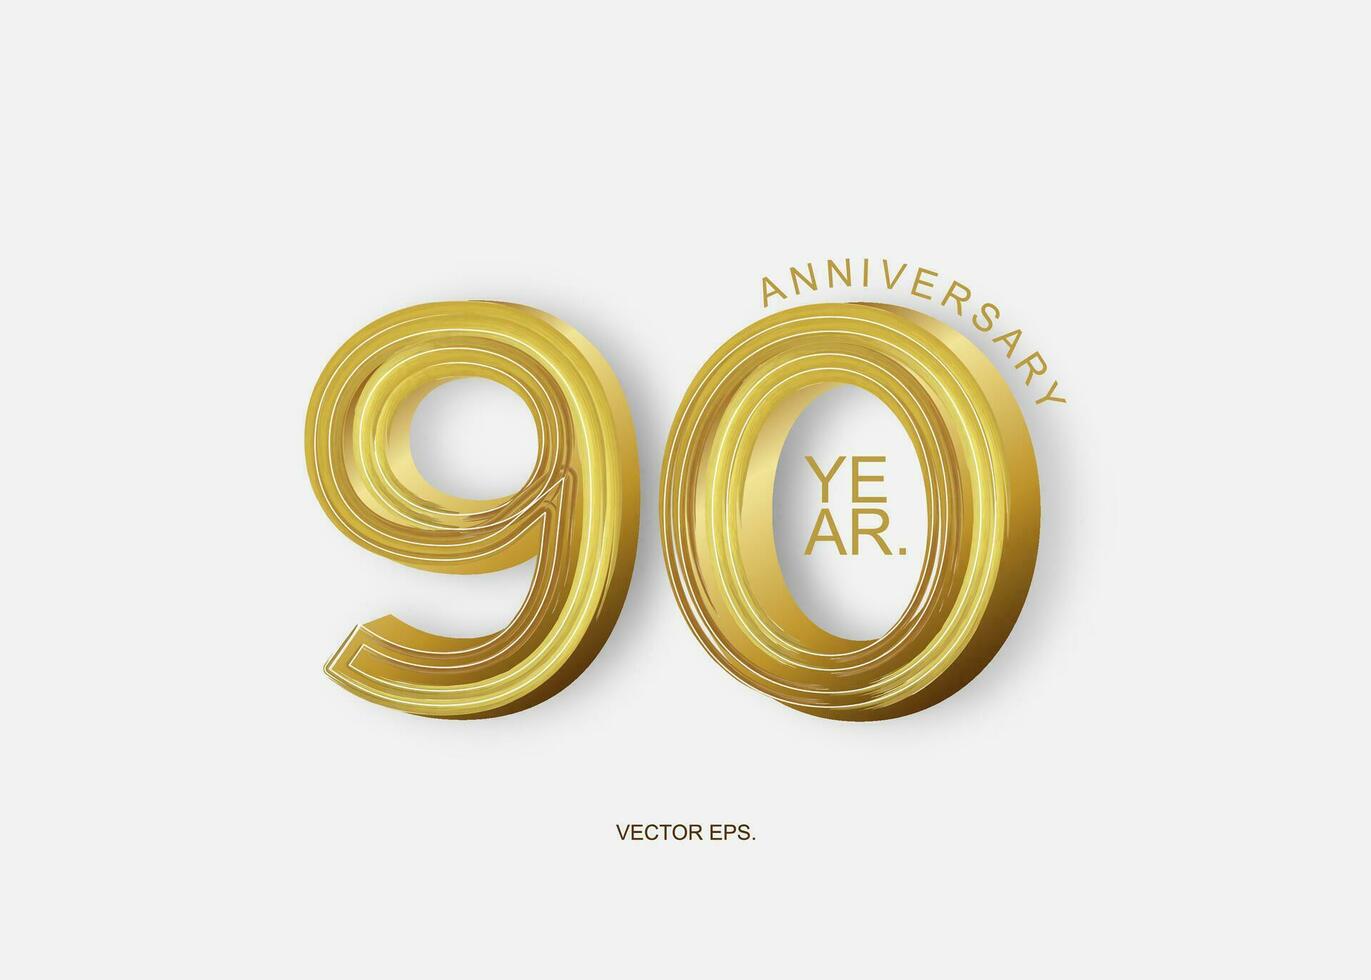 90th anniversary logo with gold text and a white background vector